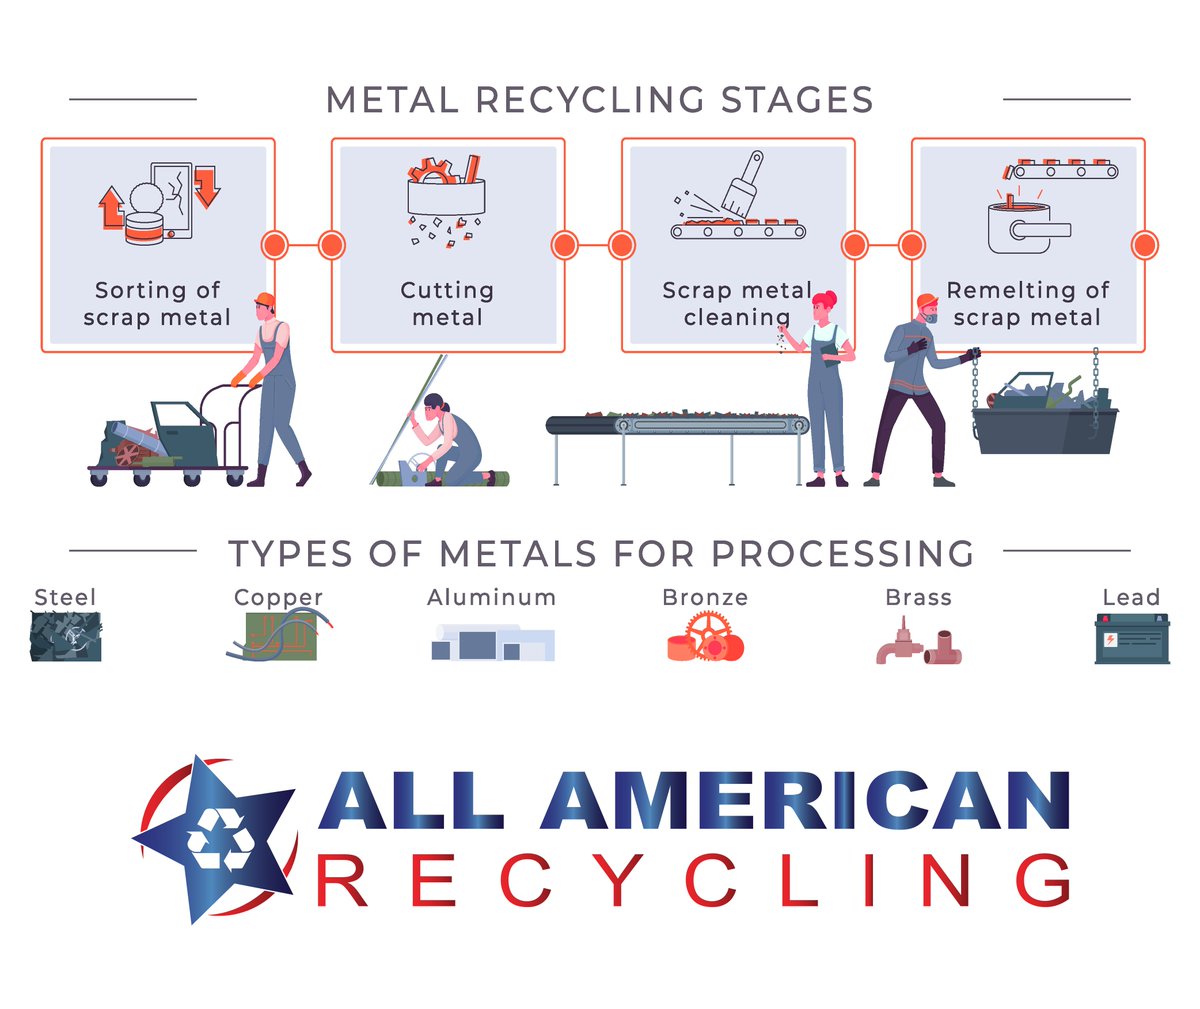 ♻️Metal recycling is a sustainable and environmentally responsible practice that plays a vital role in resource conservation, energy efficiency, and pollution reduction.♻️

#recycle #recycledmaterials #recyclingbusiness #recycled #environment #metalrecycling #metalrecyclesforever